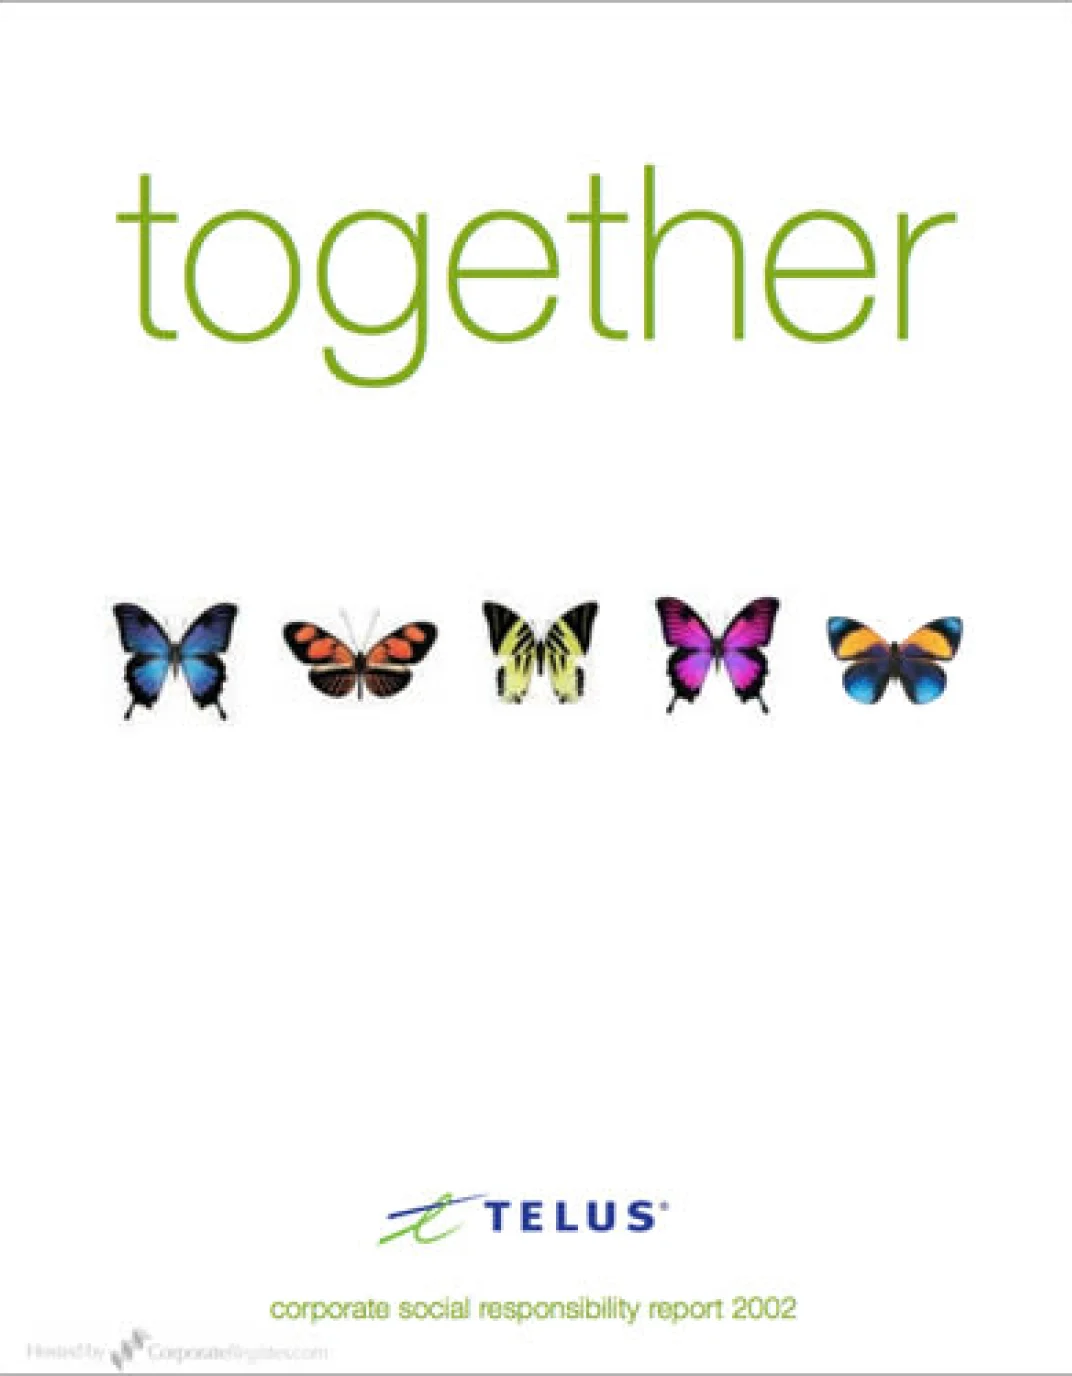 The cover of the 2002 TELUS Sustainability Report